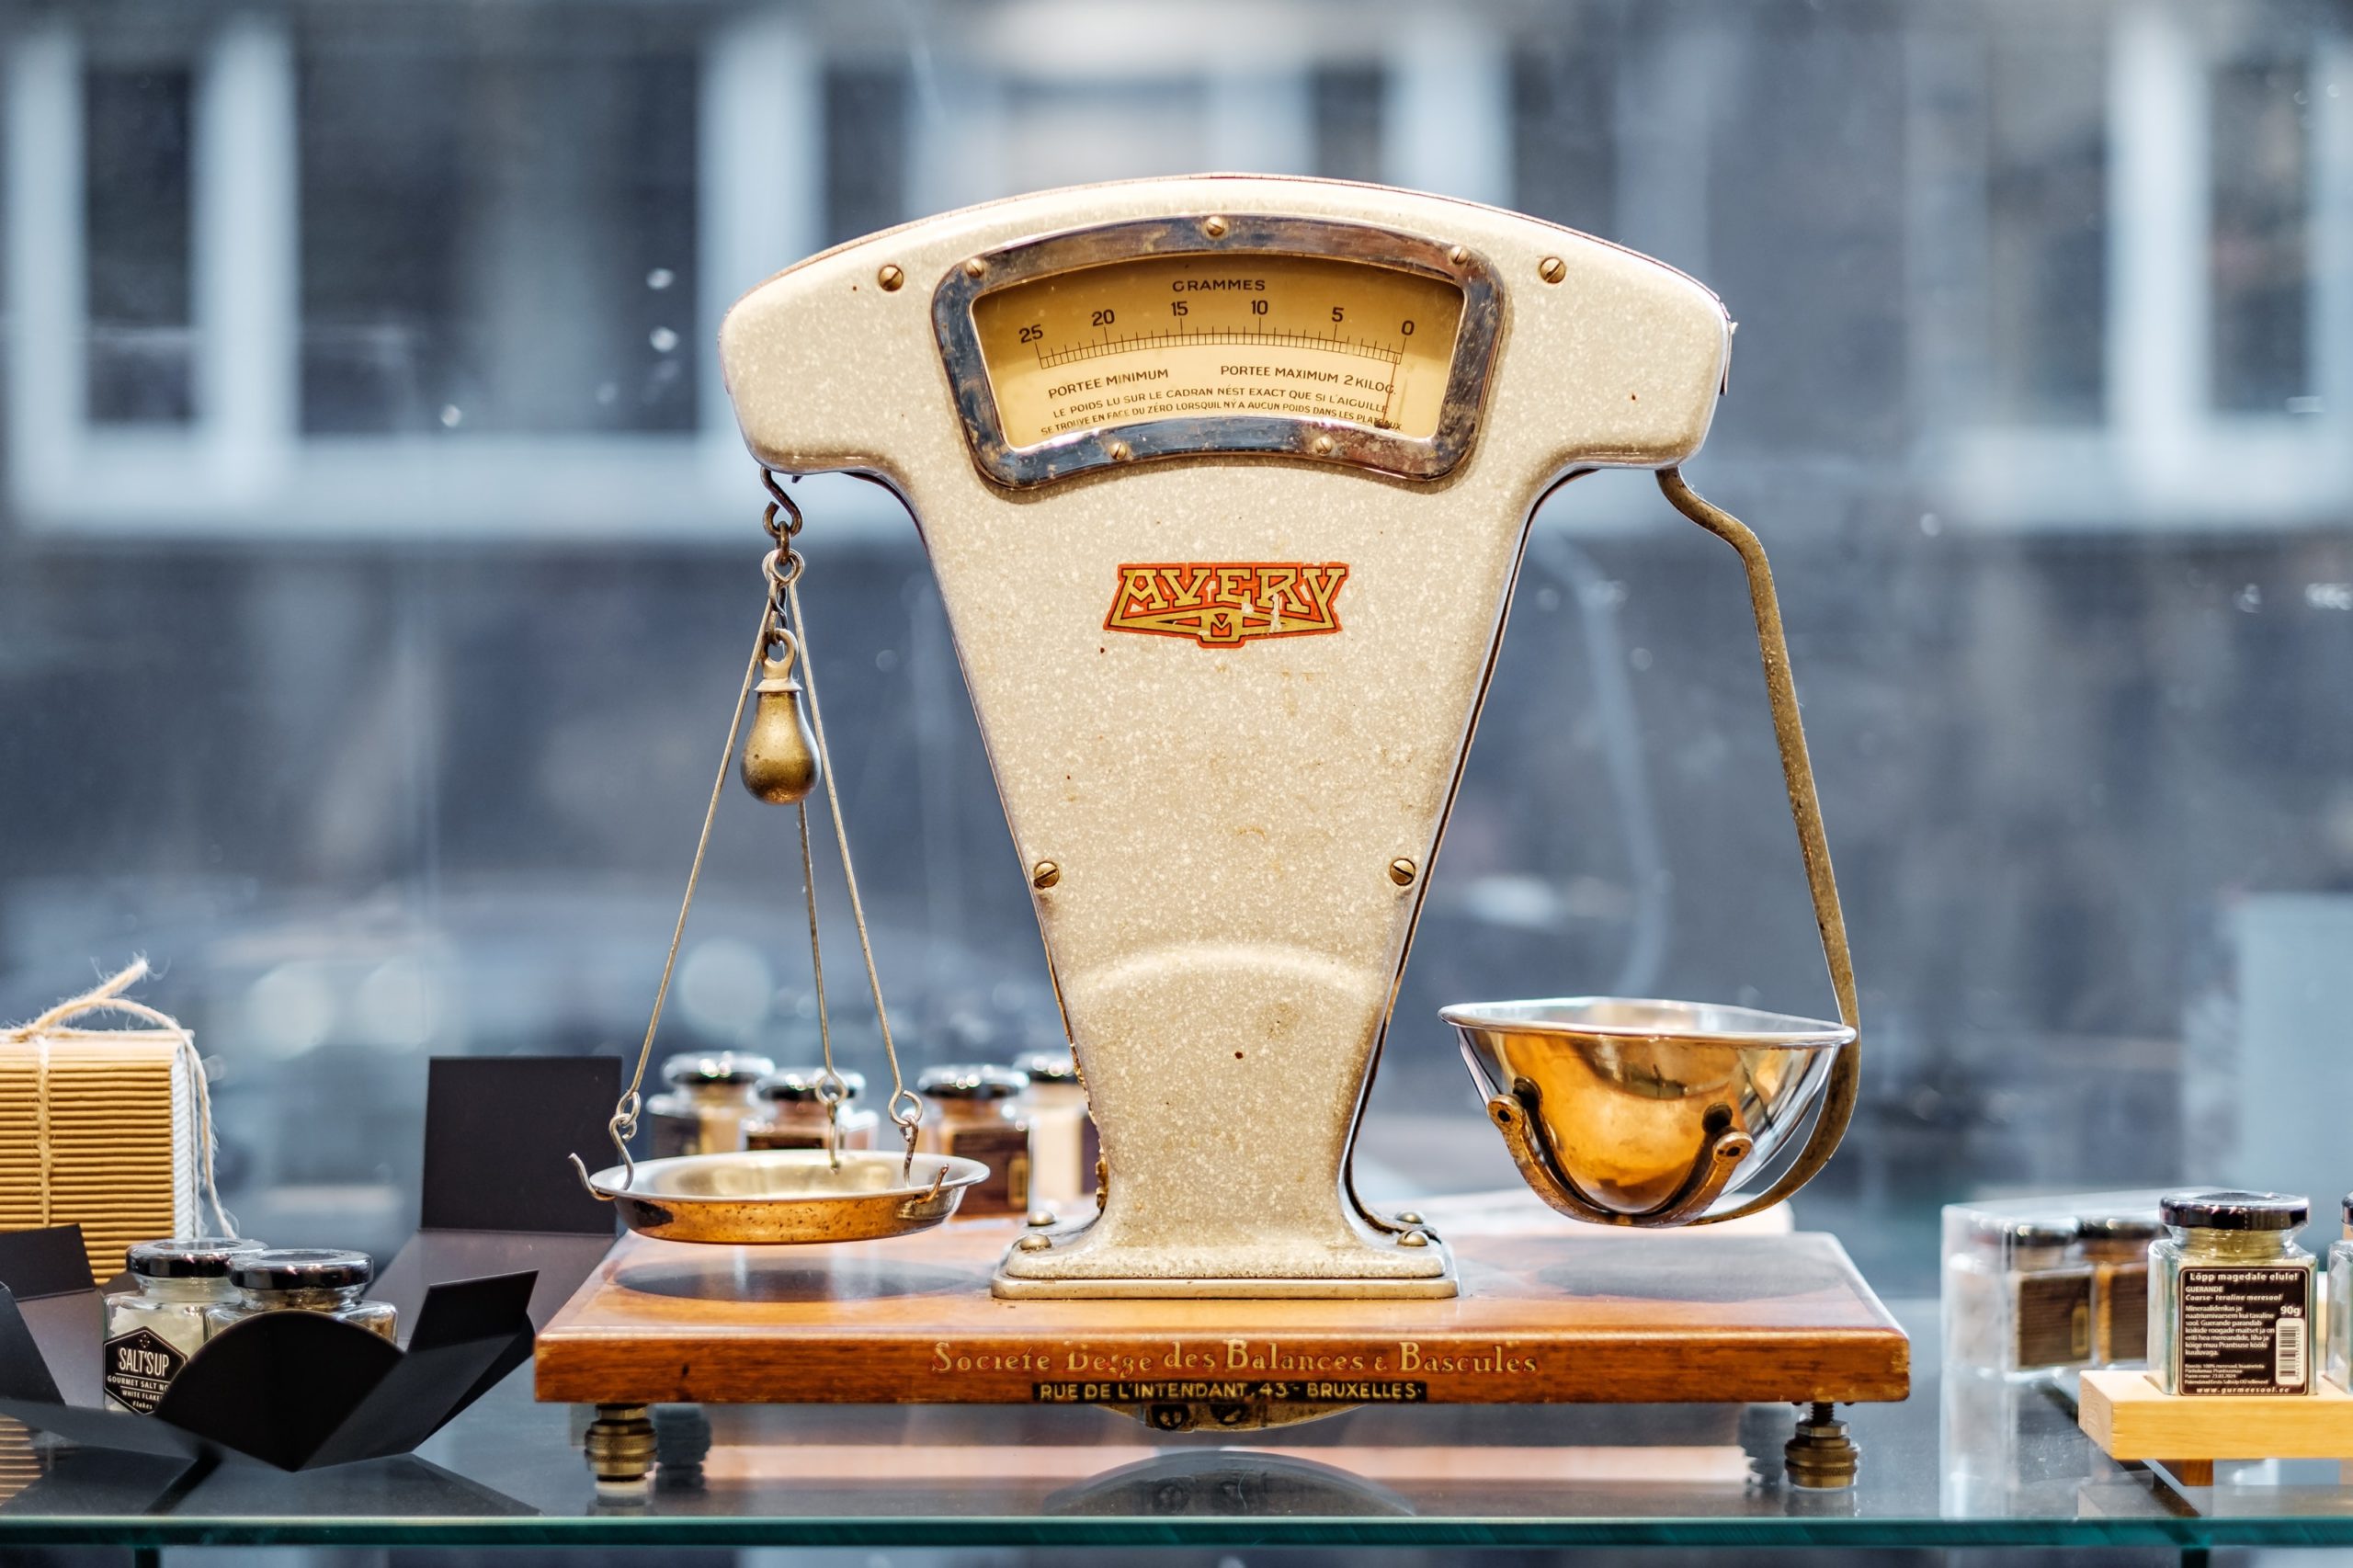 An old style scale rests on top of a table